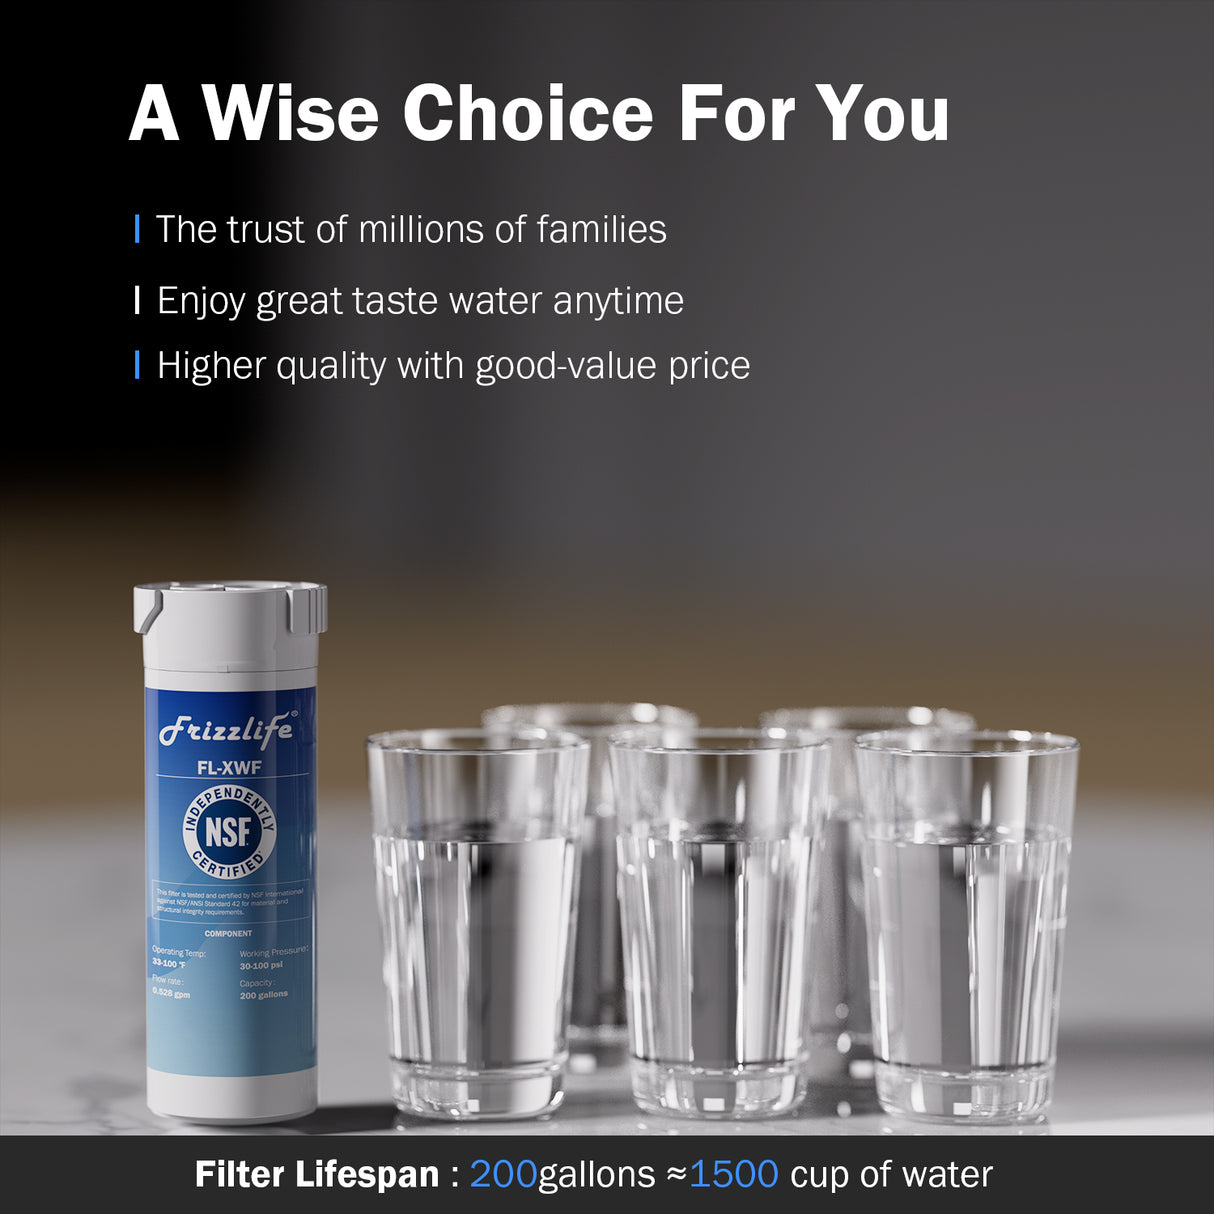 Frizzlife XWF(NOT XWFE) Refrigerator Water Filter Replacement for GE XWF, NSF Certified Fit the Original Brand, Leak-proof Design